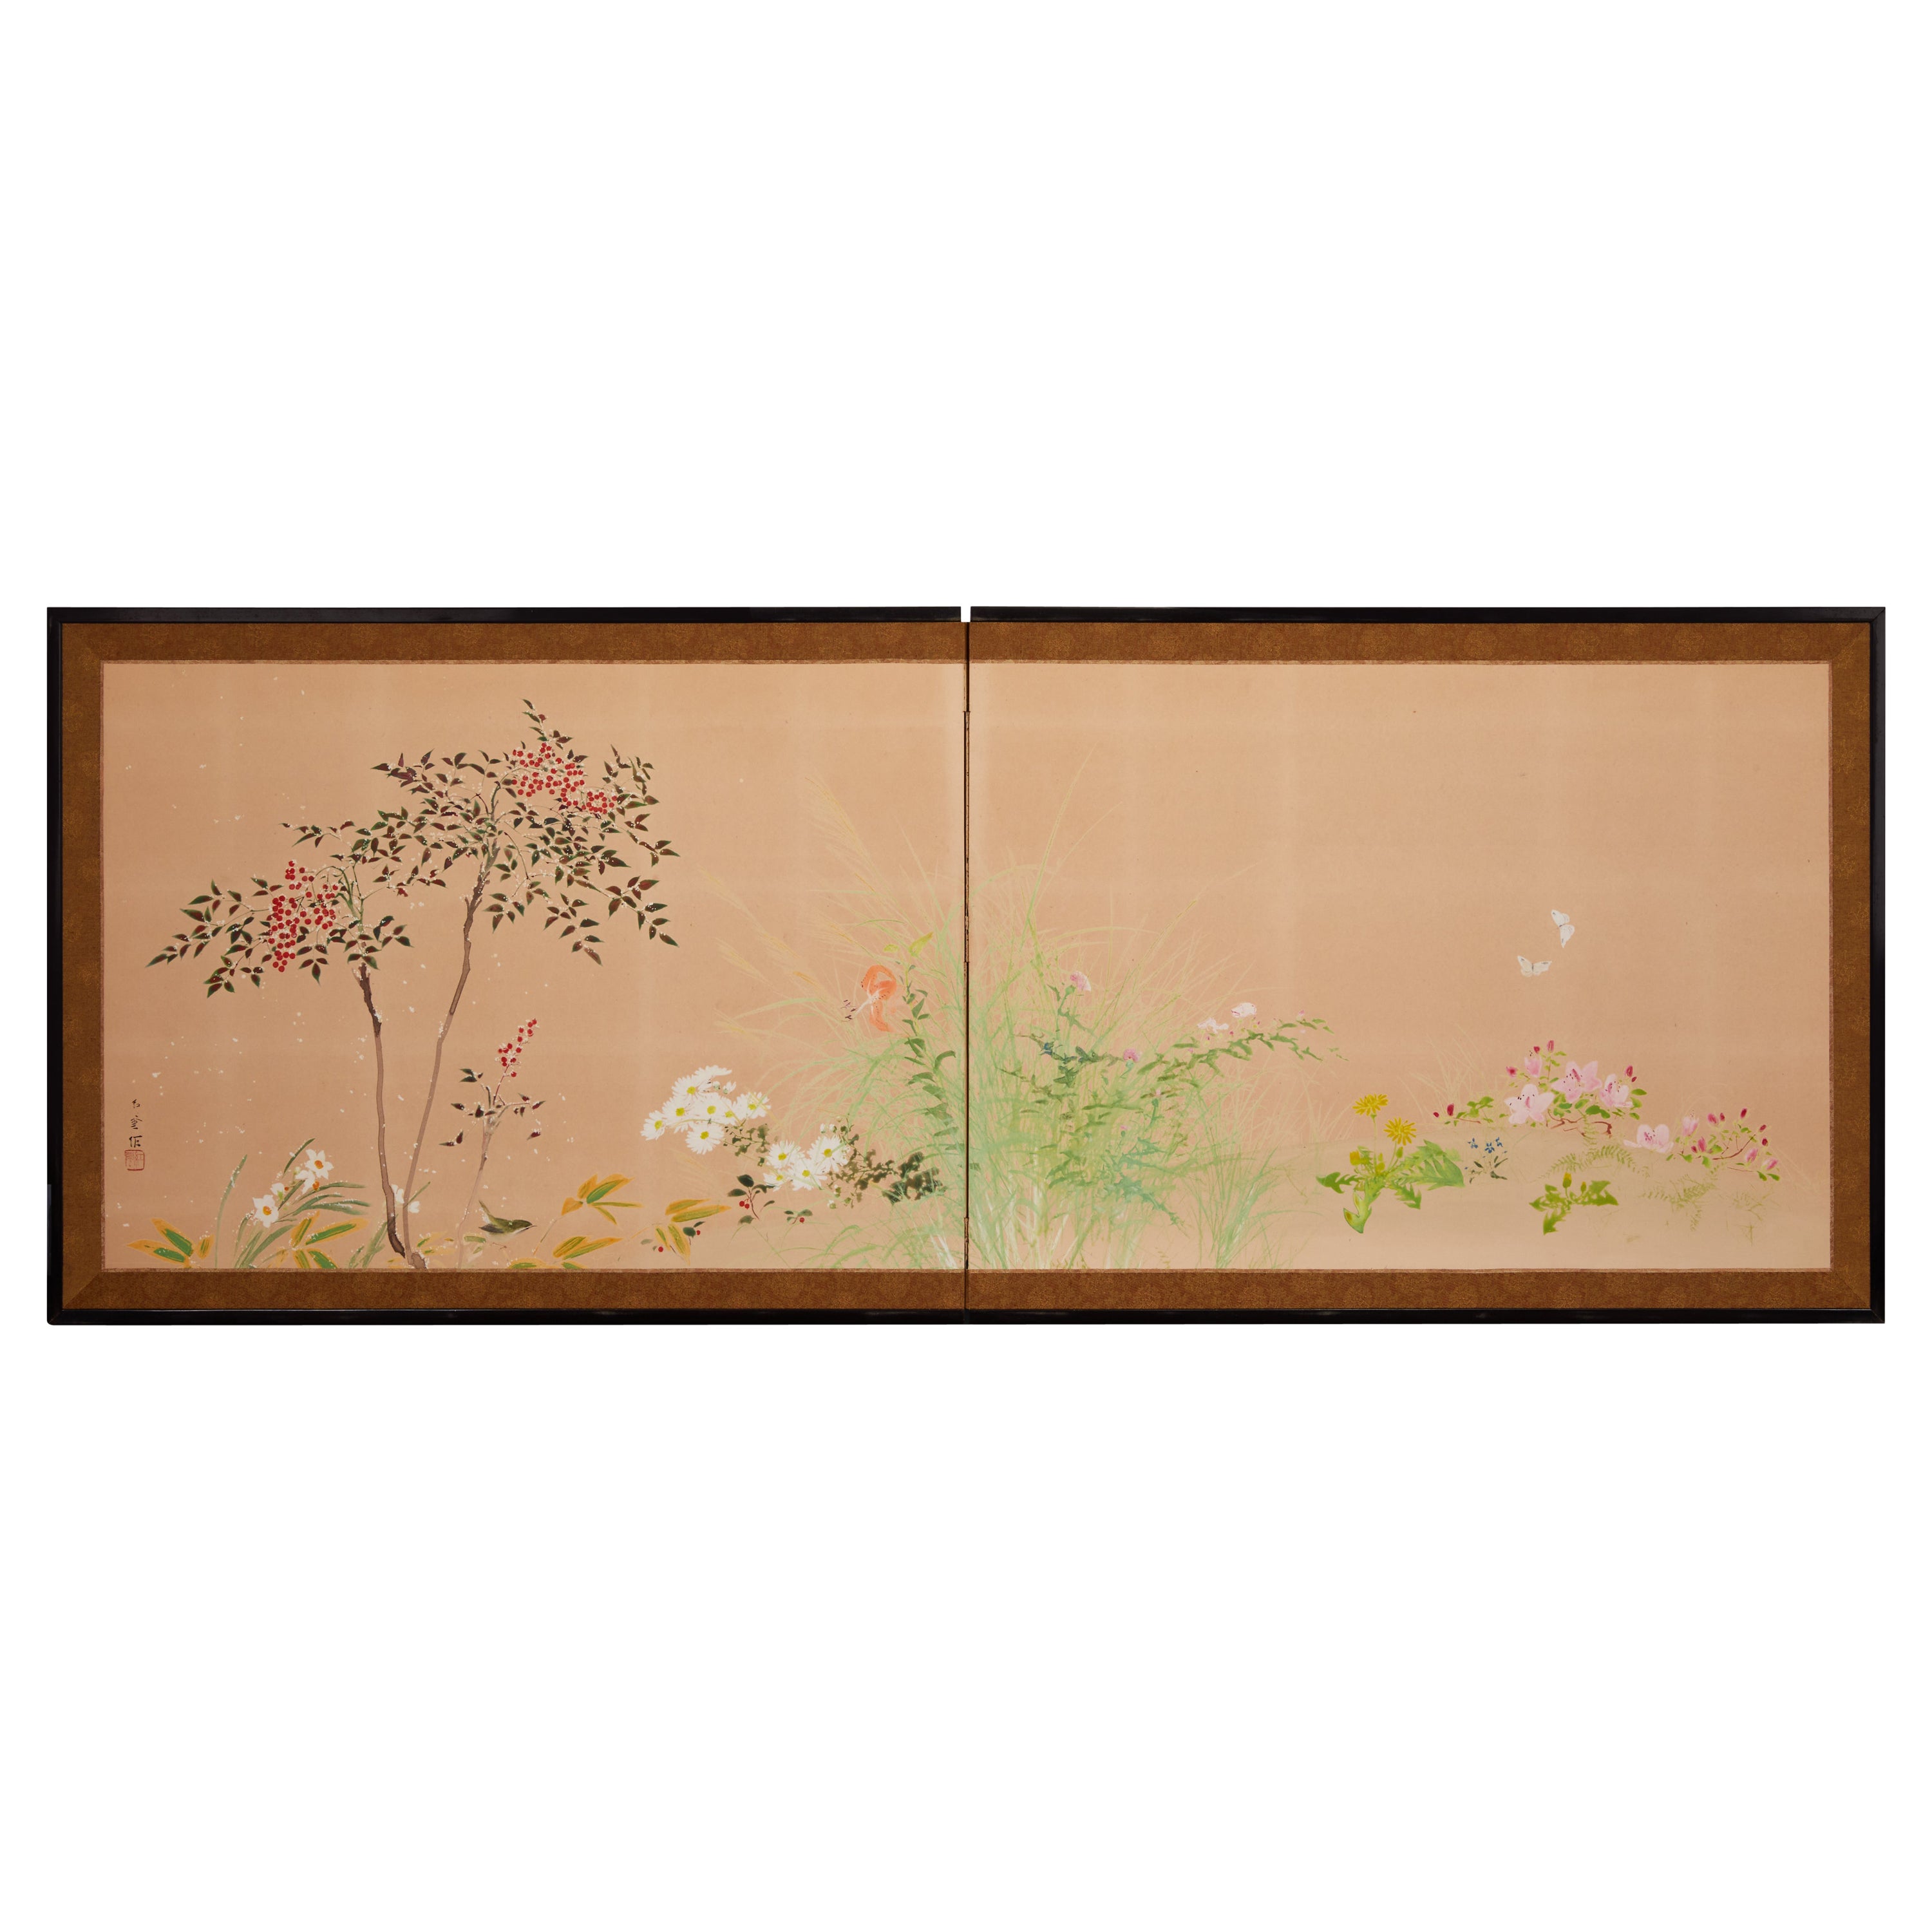 Japanese Two Panel Screen: Winter into Spring Floral Landscape